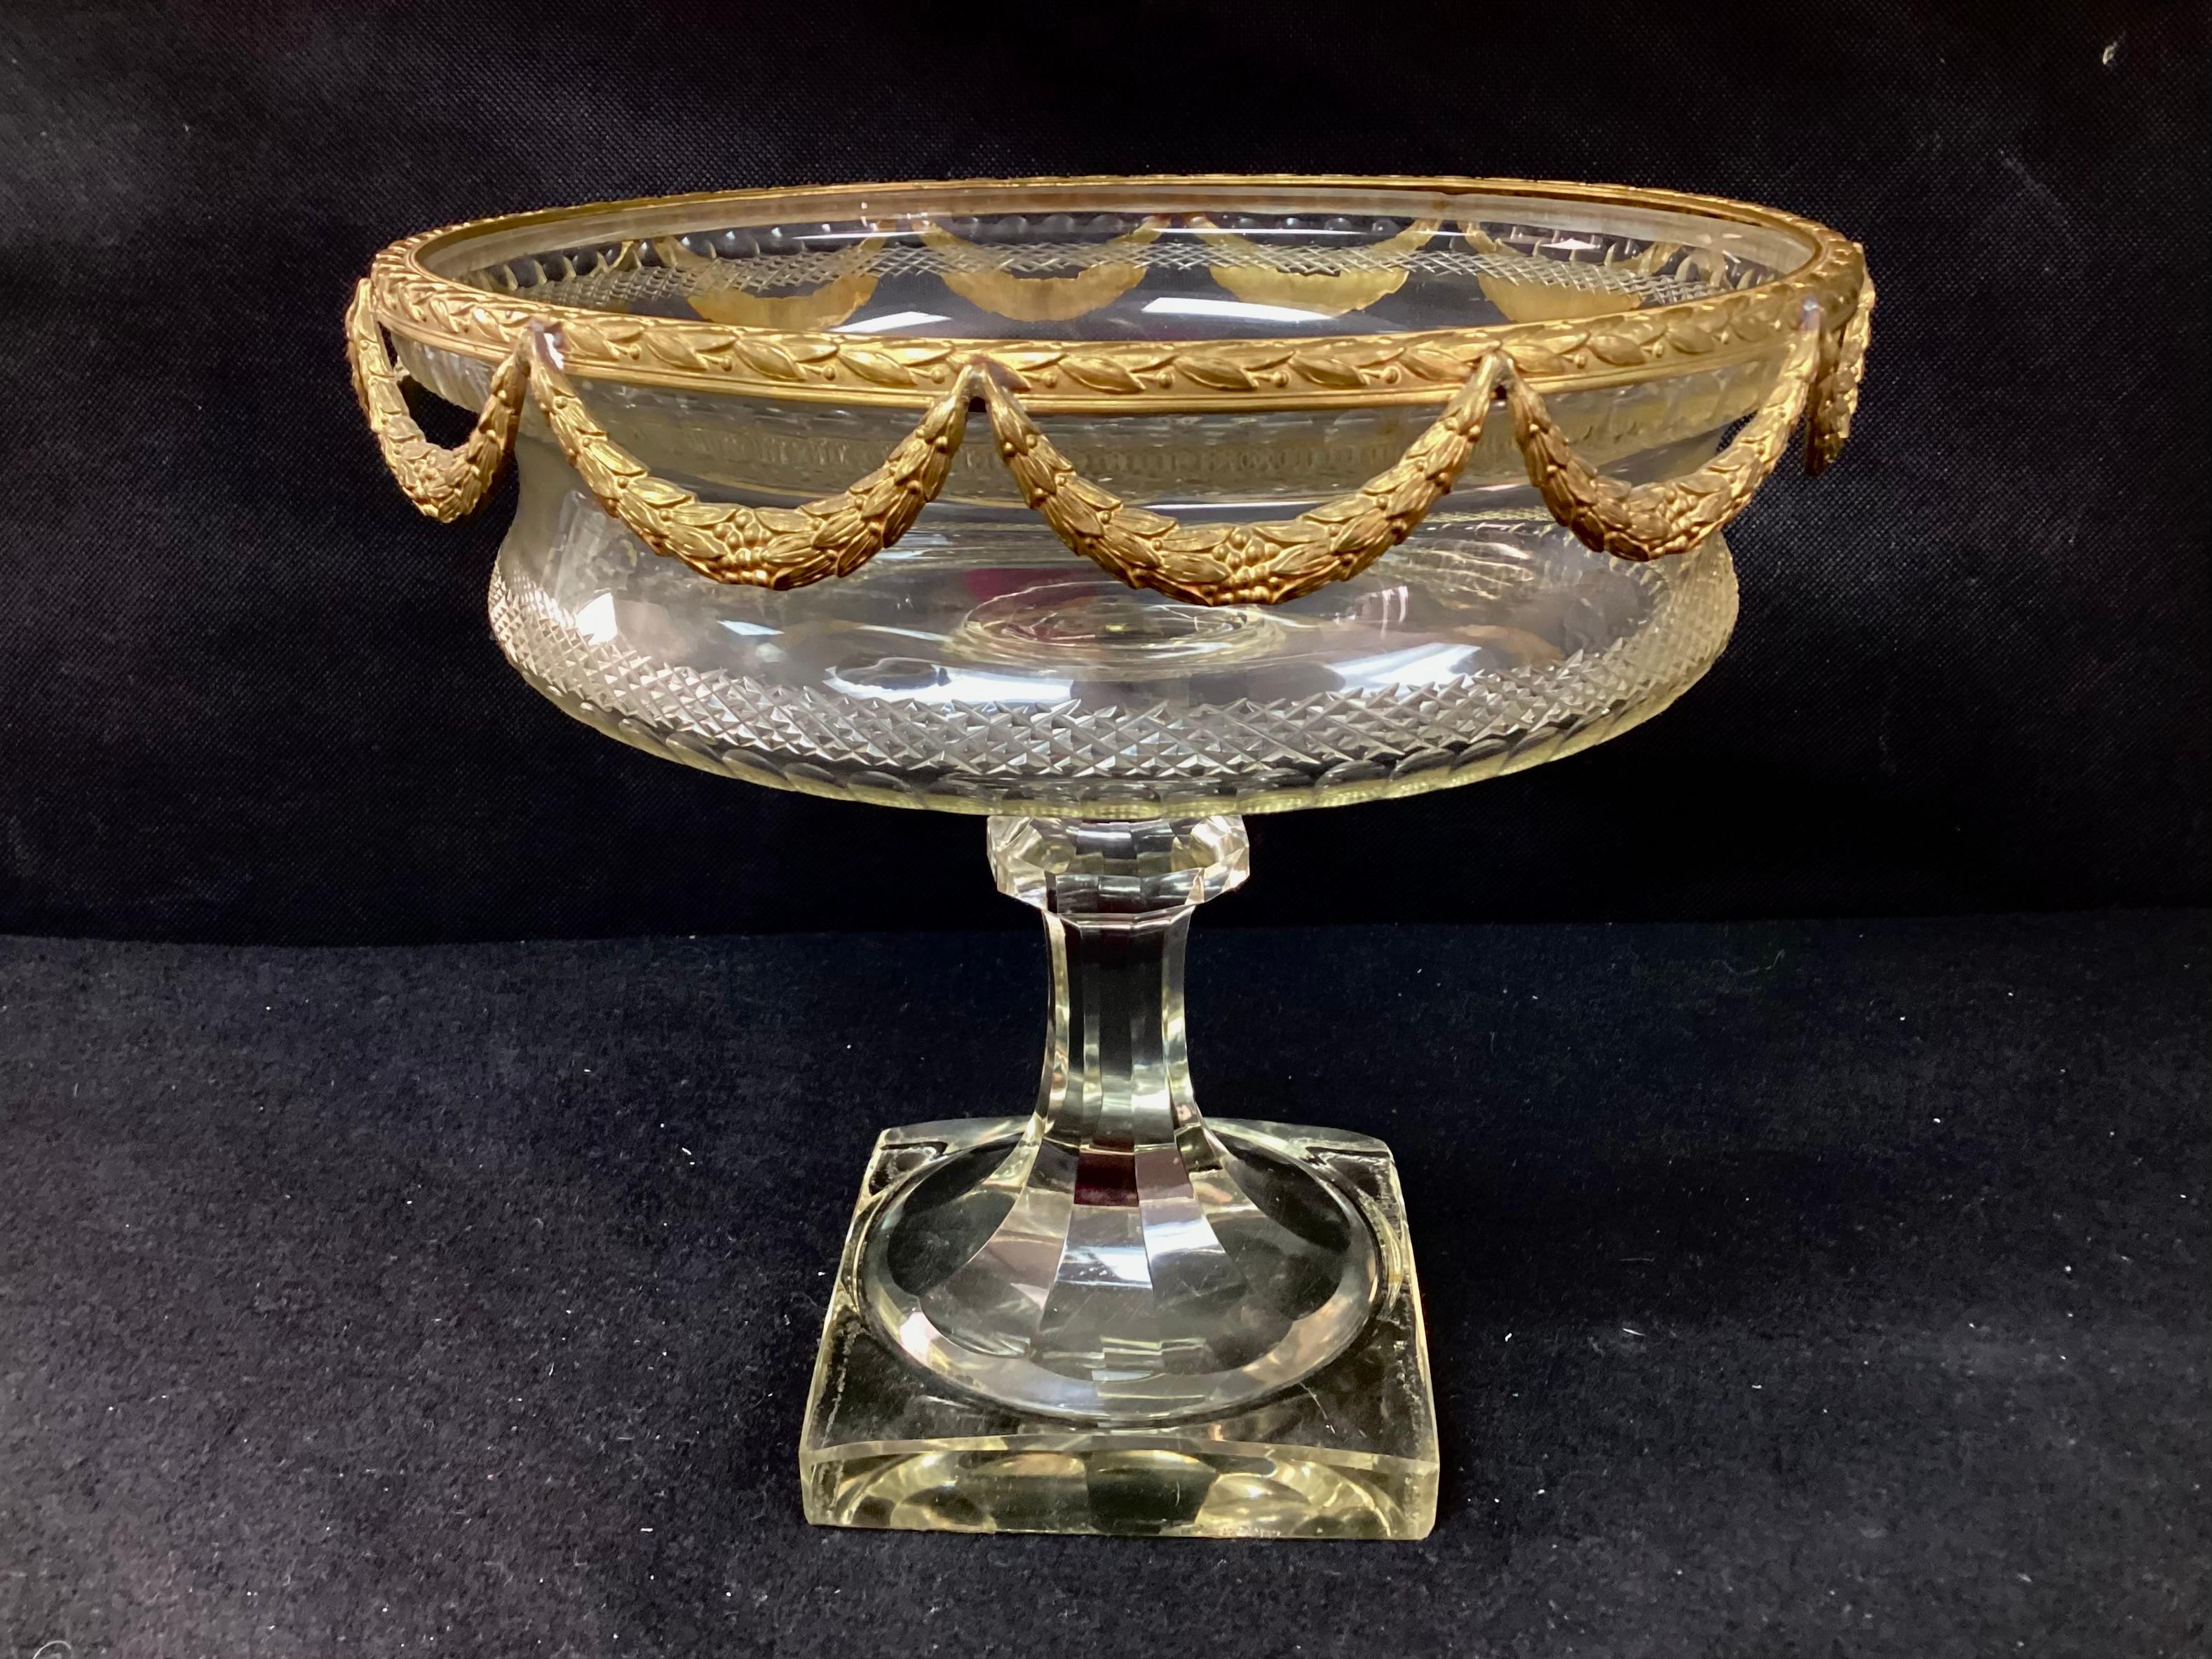 Louis XVI style large French cut lead crystal and ormolu bronze pedestal centerpiece/bowl. Features hand-cut crystal with gilt bronze top trim. Attributed to Baccarat. Can be use to hold fruit, as a decorative display, or as a centerpiece for a